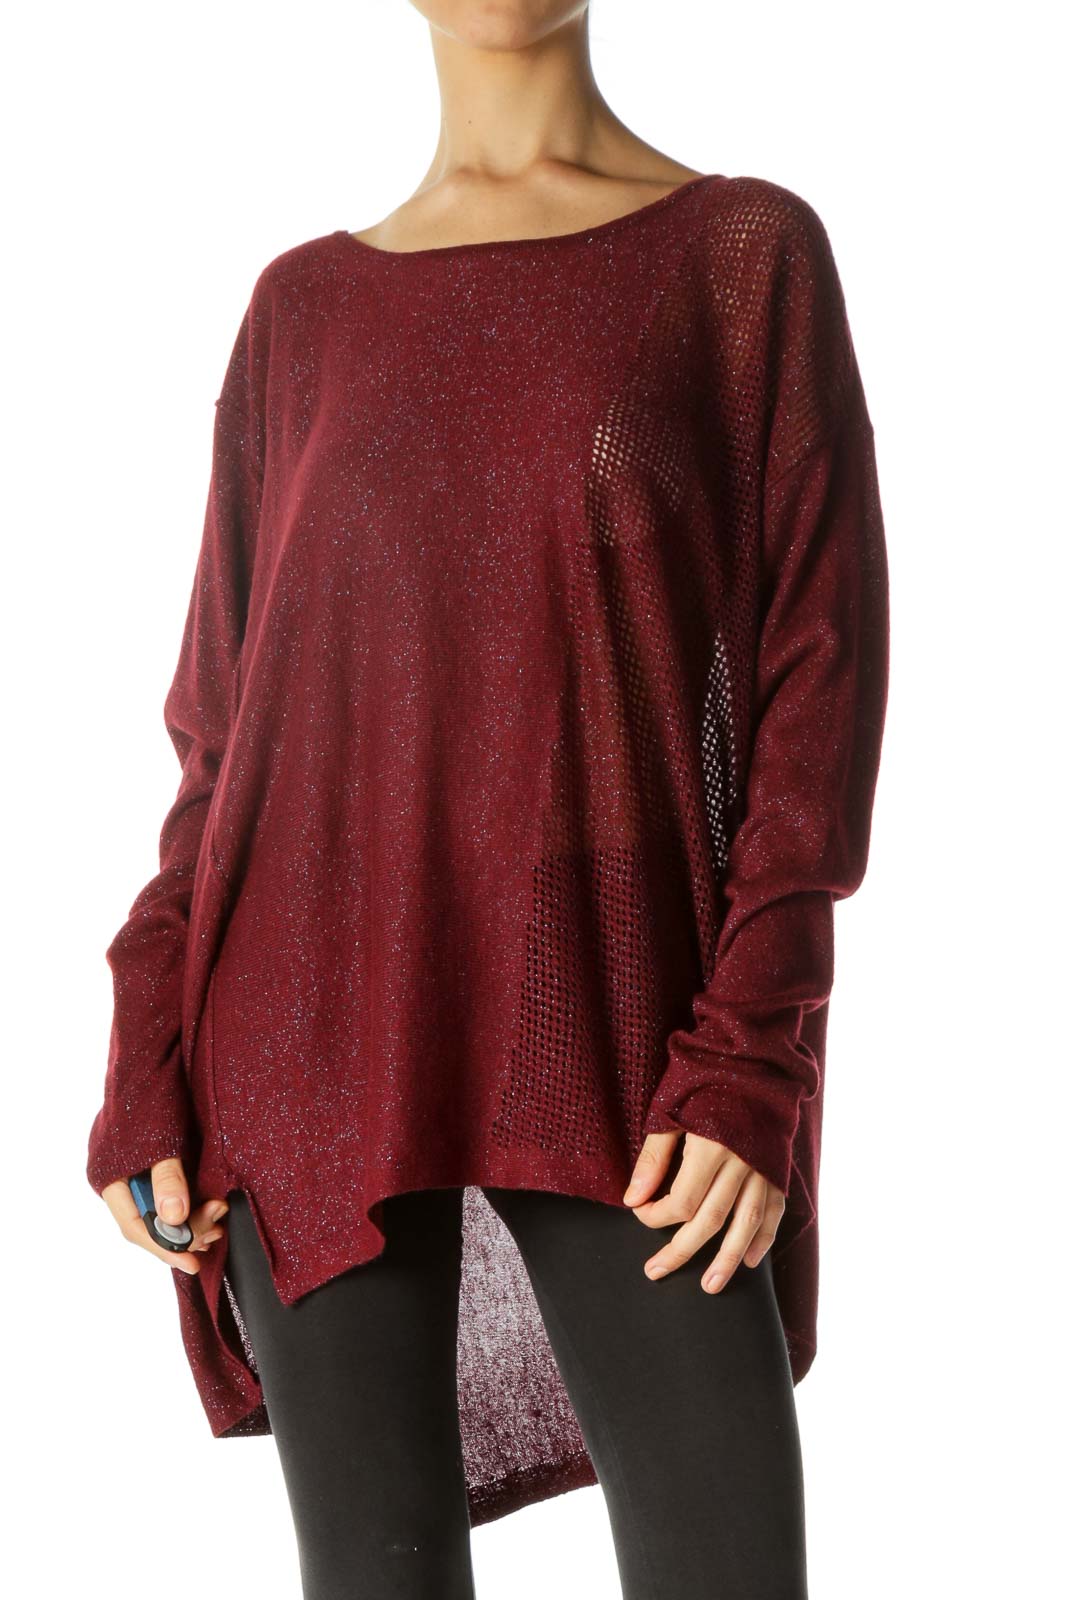 Burgundy Black Silver Round Neck Soft See-Through Knit Top Front